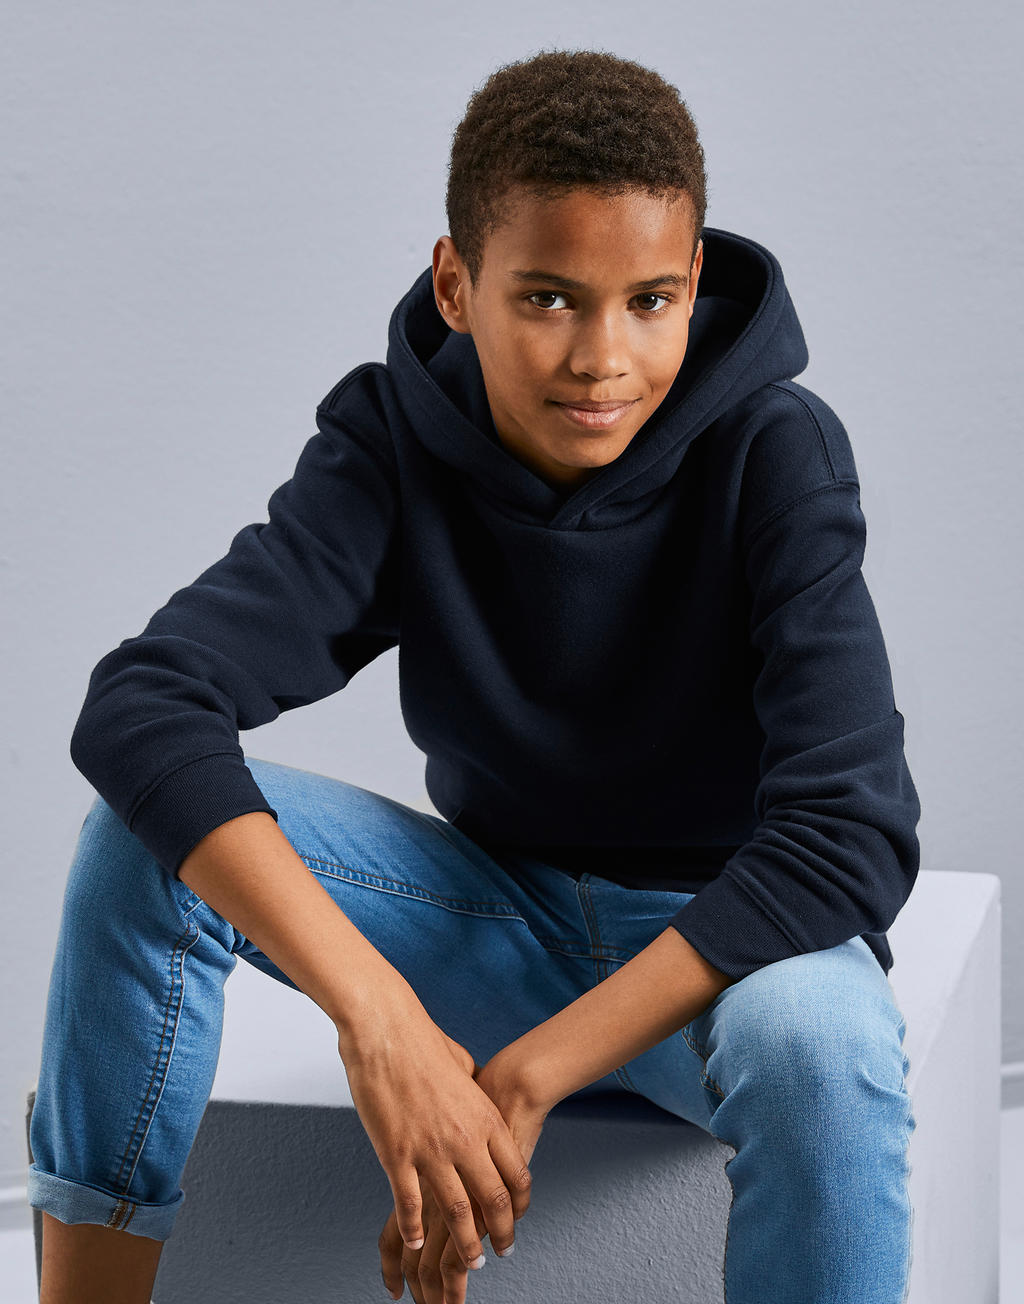  Kids Authentic Hooded Sweat in Farbe Black